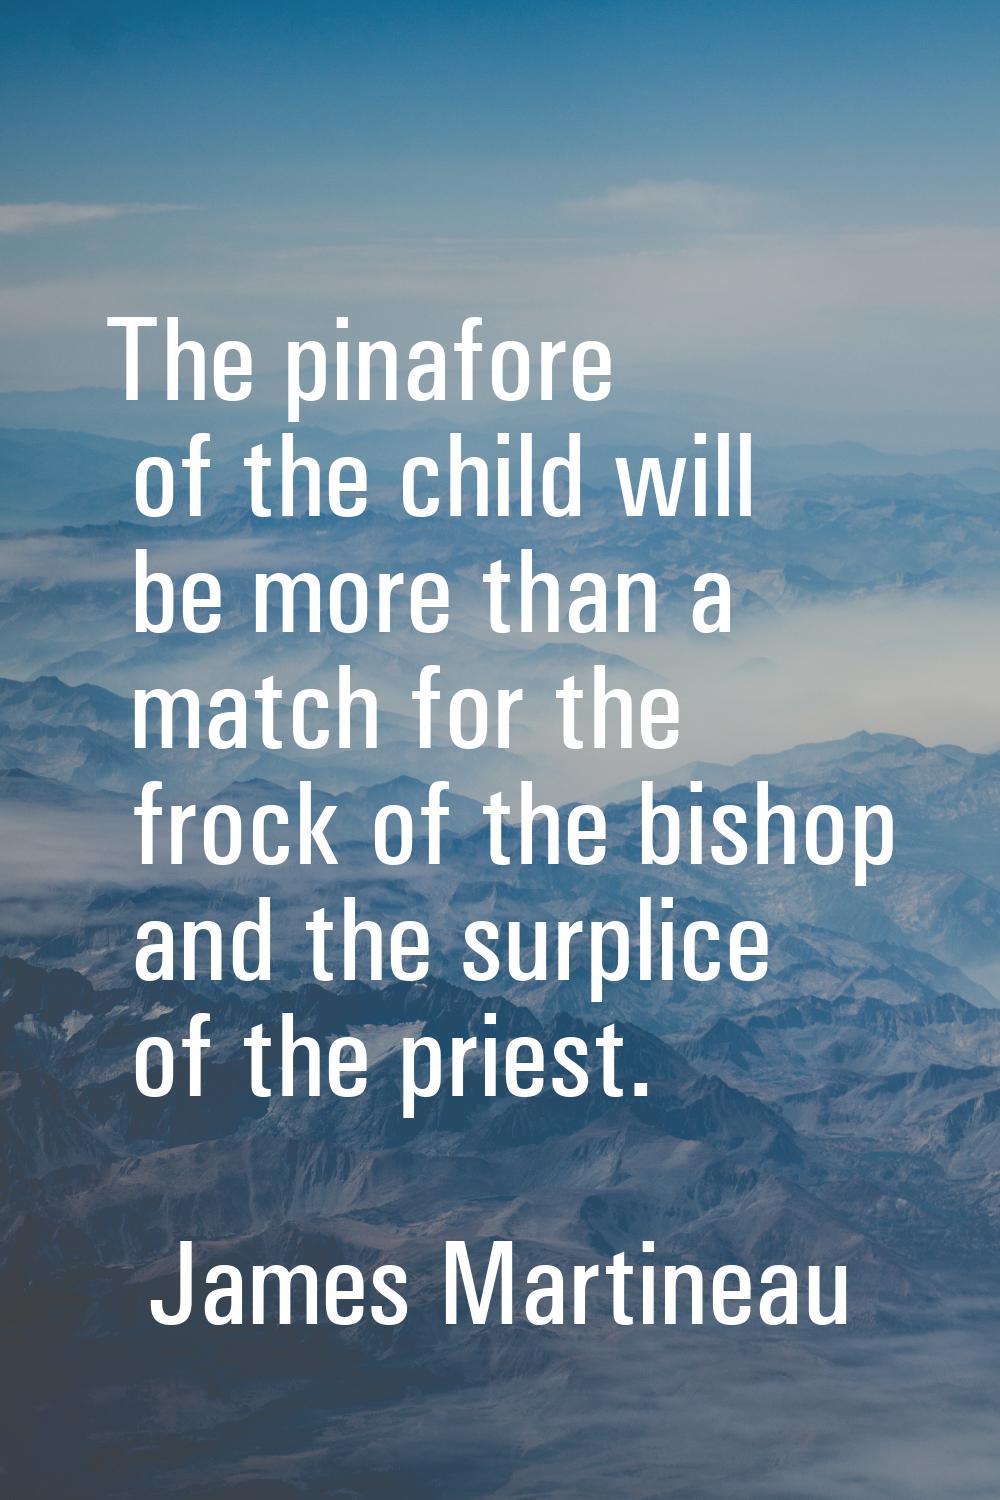 The pinafore of the child will be more than a match for the frock of the bishop and the surplice of